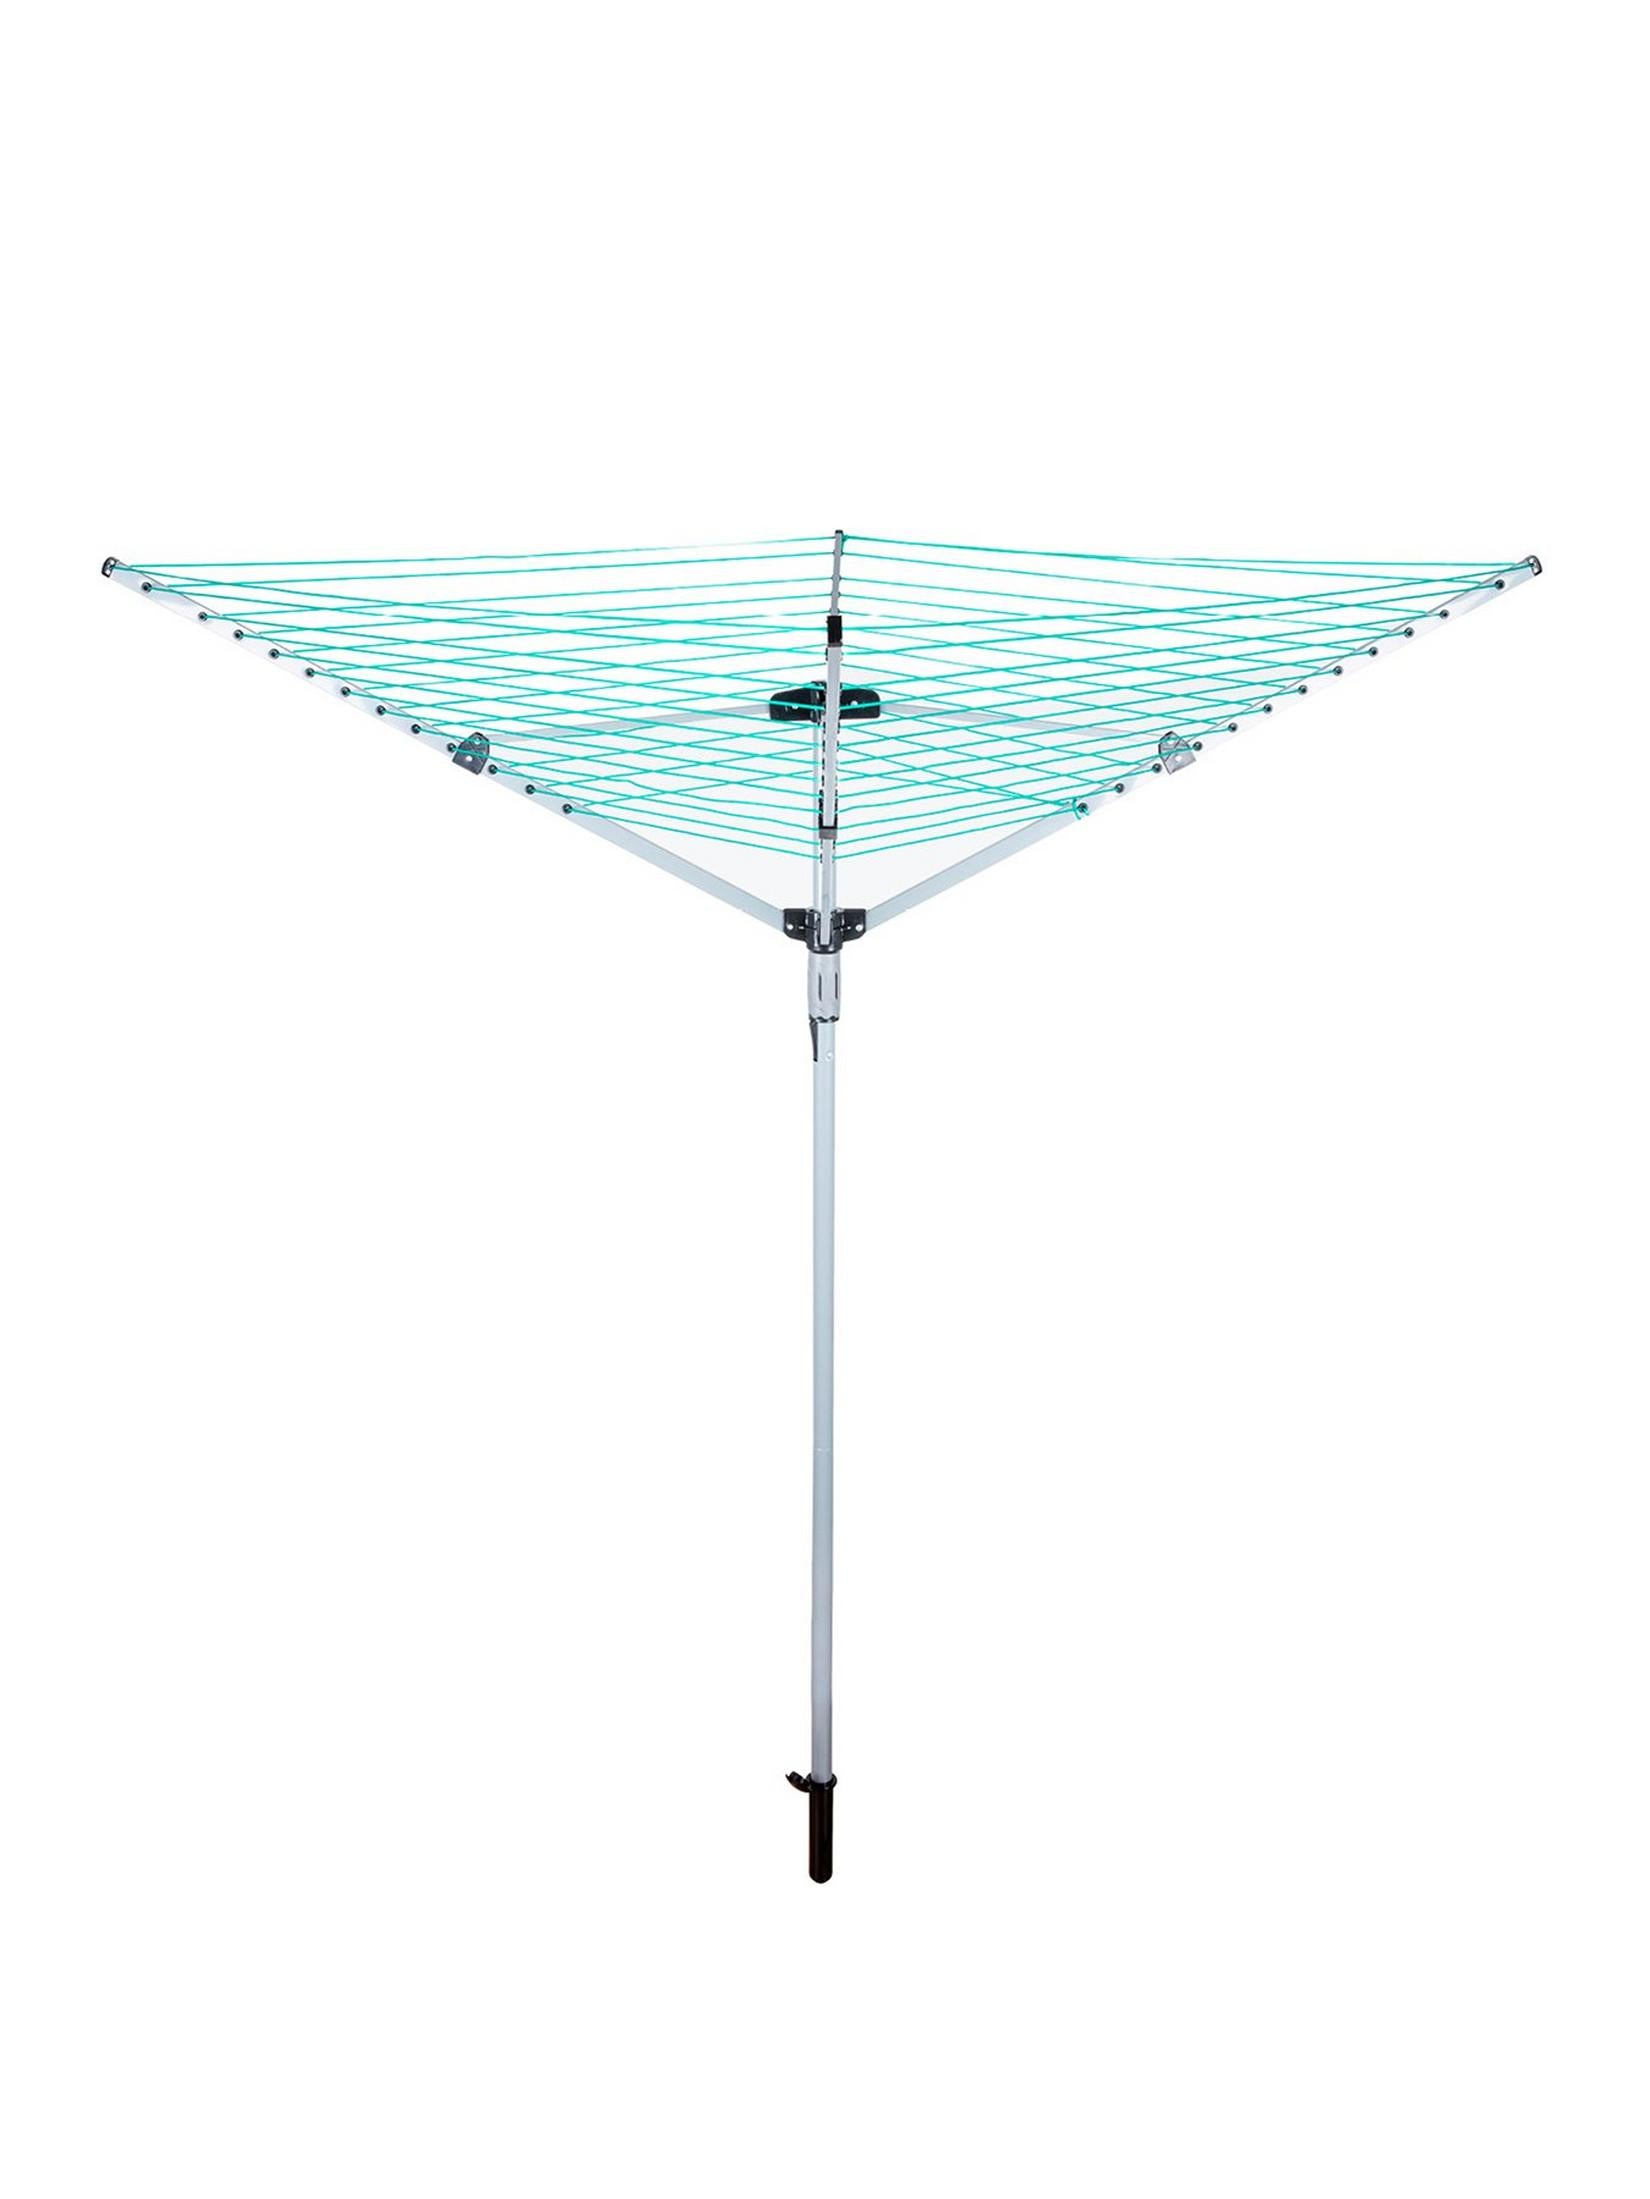 Ourhouse Rotary Airer 40m  - Grey  | TJ Hughes